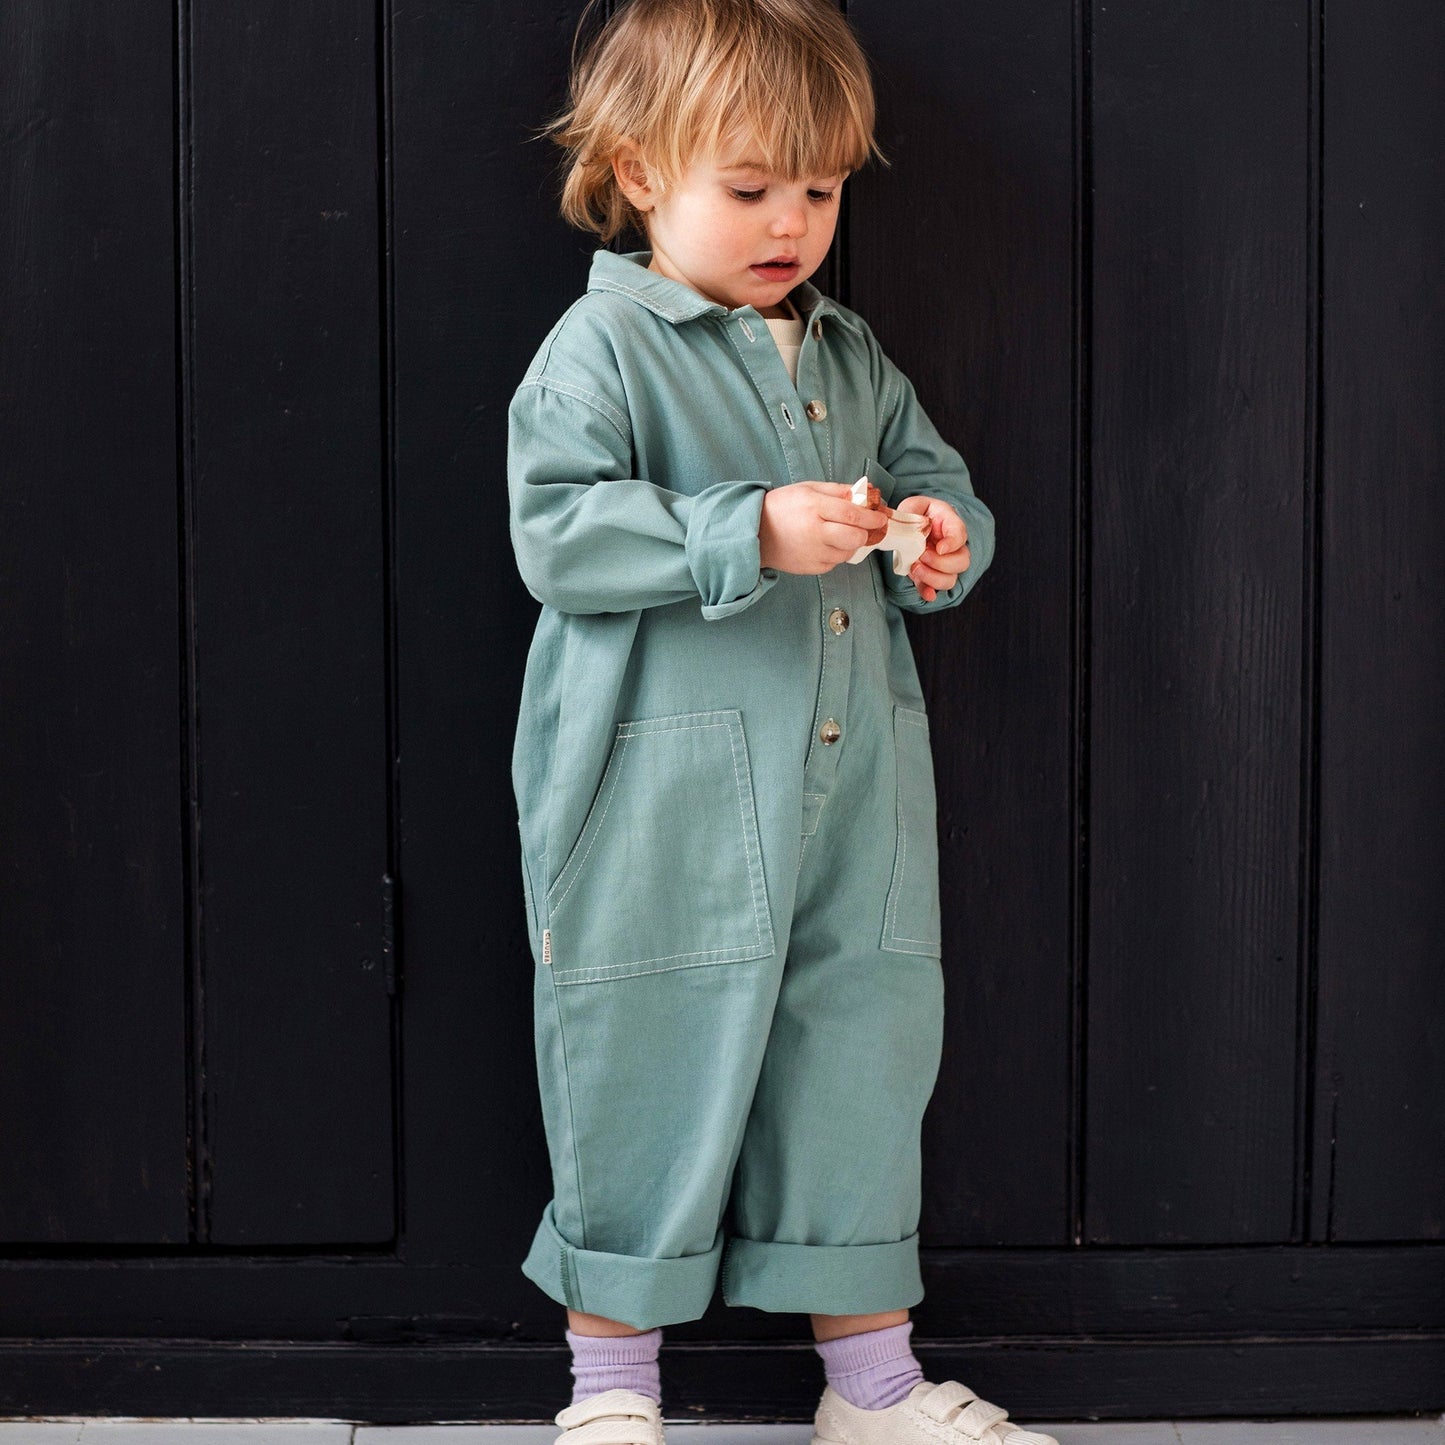 Claude and Co Kids Western Overall Sea, Milking It Western Overalls, Nottingham Kids Shop, Children’s Overalls, Children’s All In One,  Nottinghamshire Stockist, Midlands Children’s Store, Sustainable Children’s Clothing, Overalls 